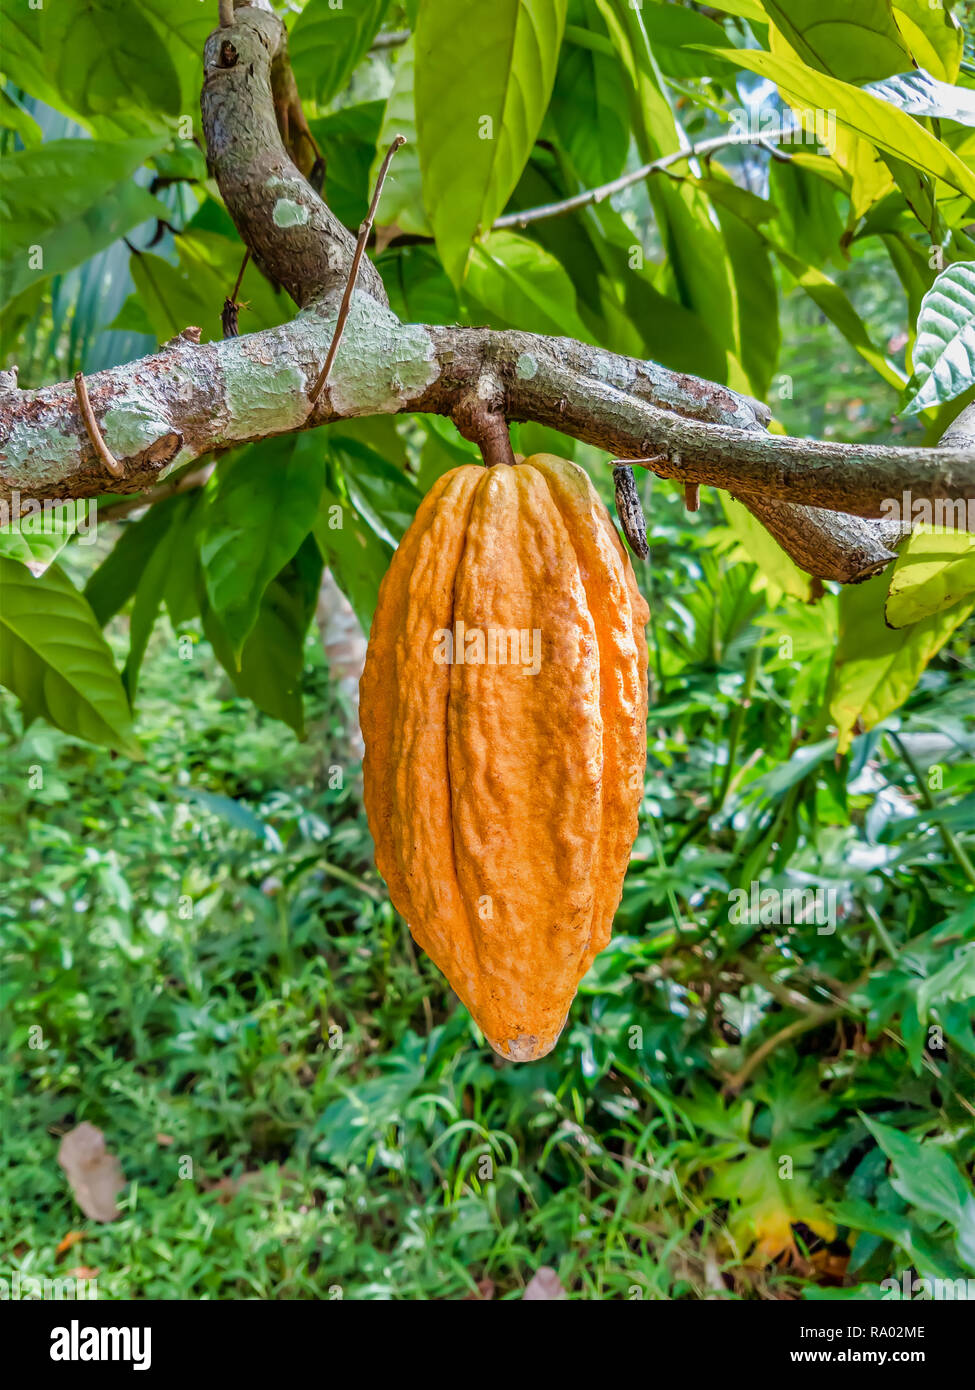 Orange unripe cocoa fruit hanging from the branch. Stock Photo